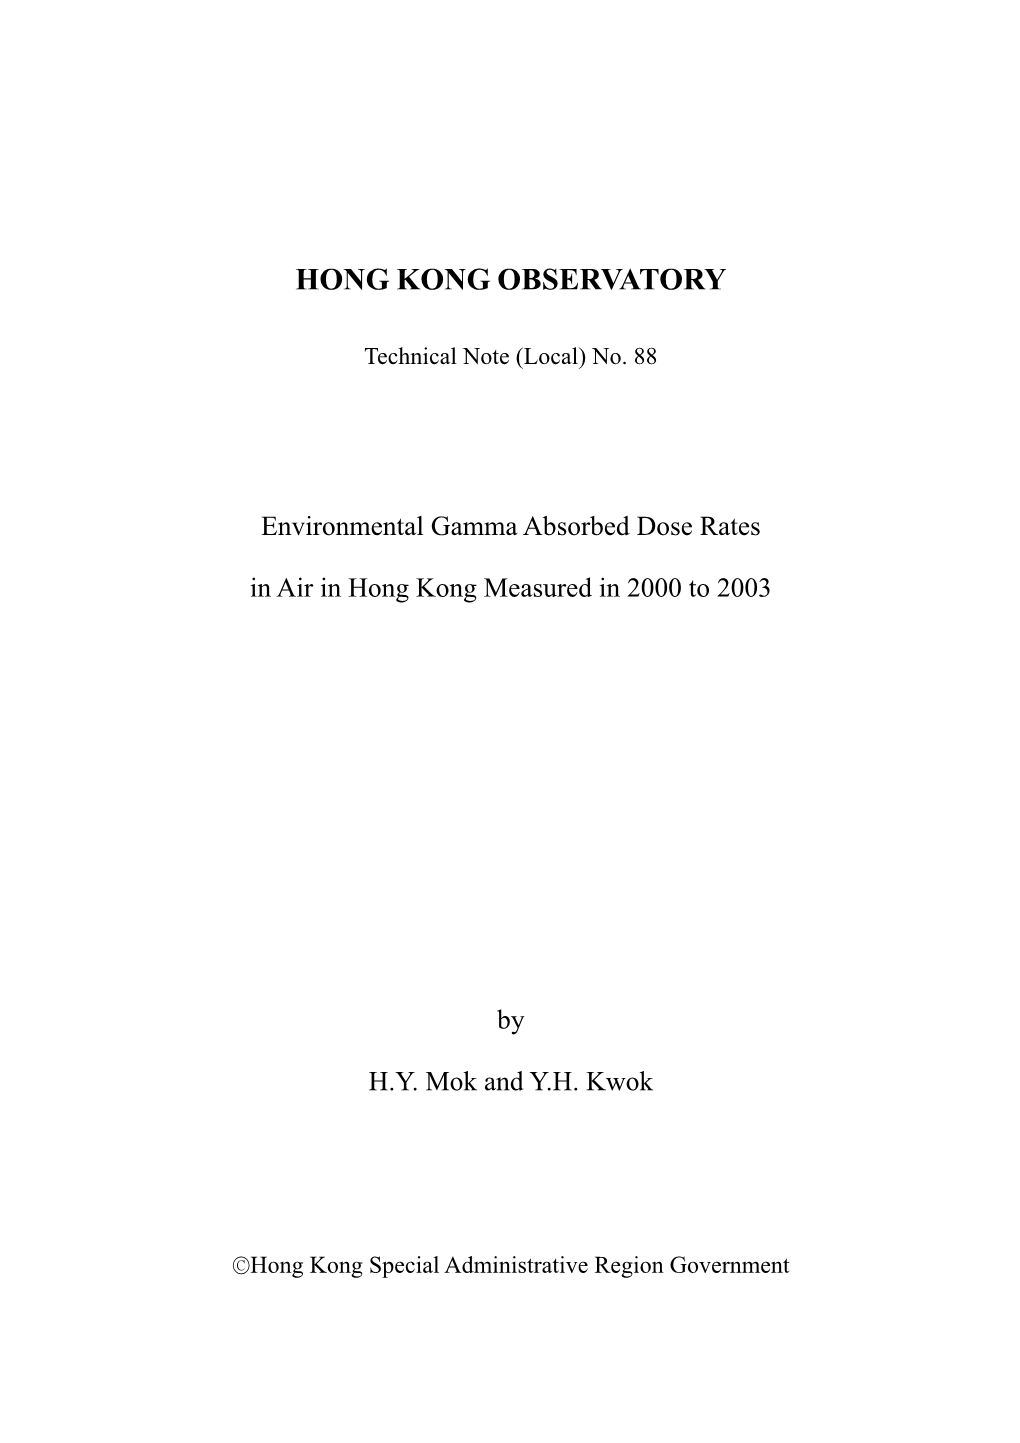 Environmental Gamma Absorbed Dose Rates in Air in Hong Kong from 2000 to 2003